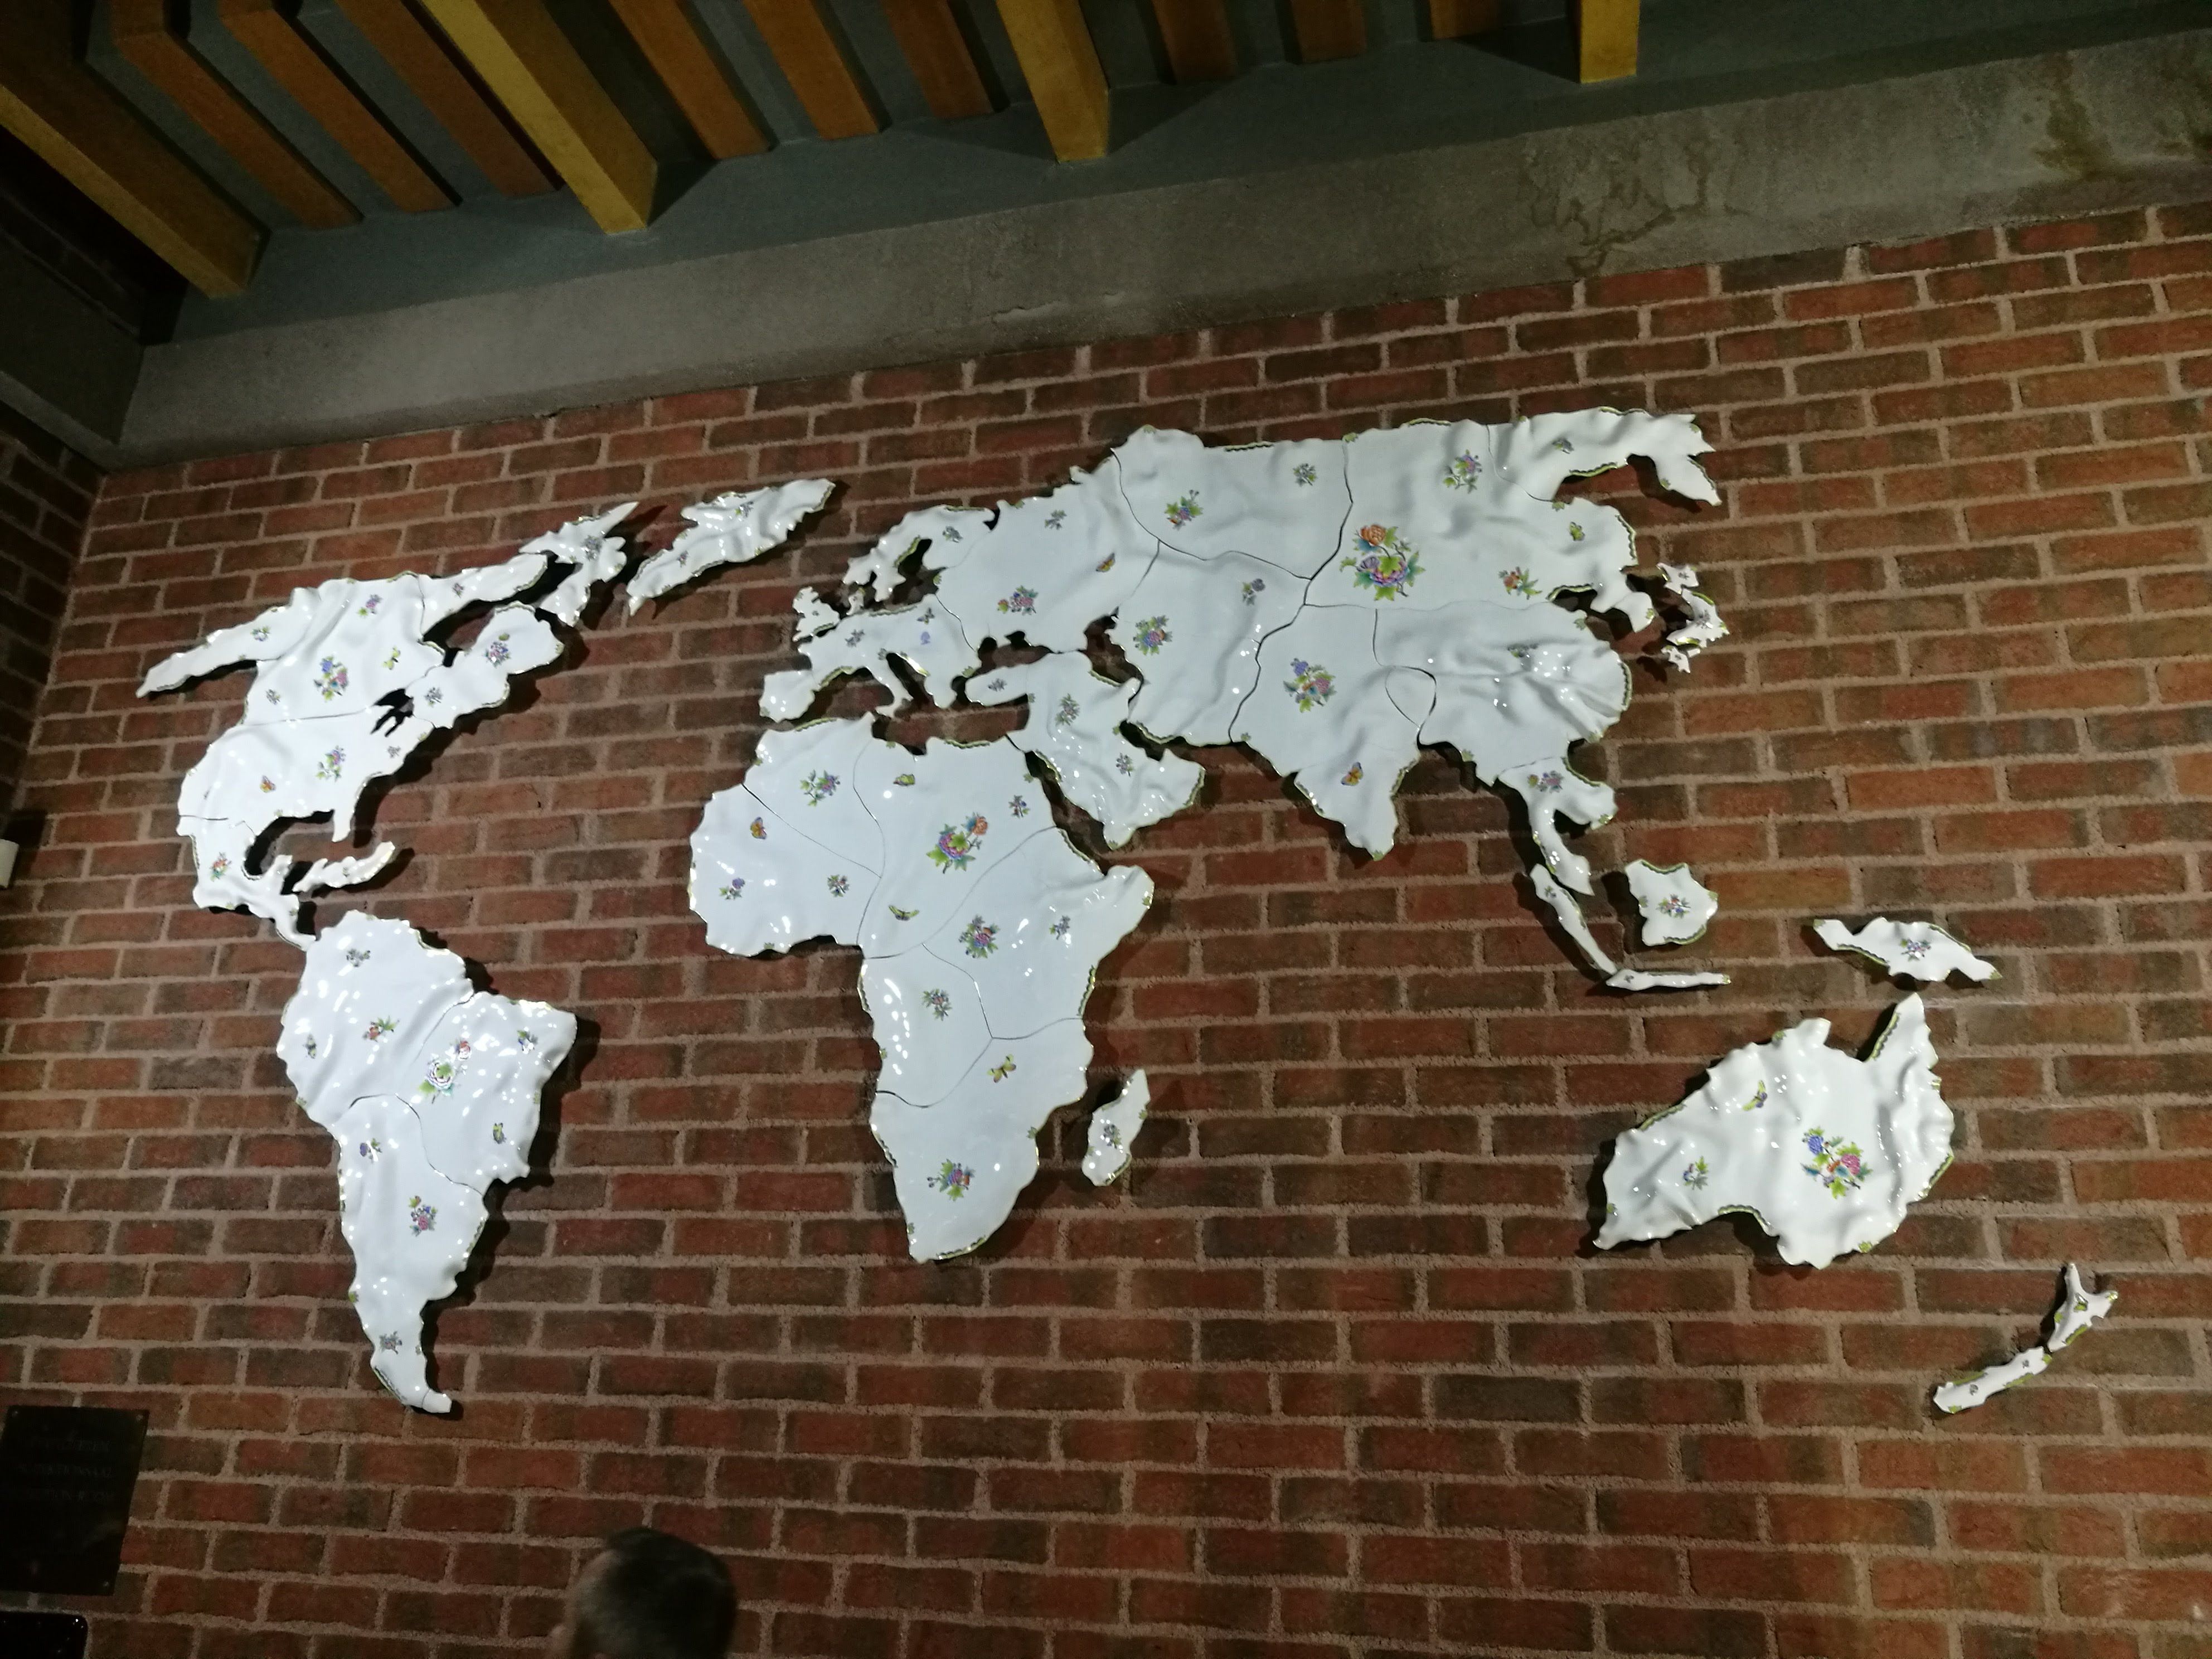 The world map made of hand crafted and painted porcelain elements in the Herend Porcelain Manufacture, Hungary